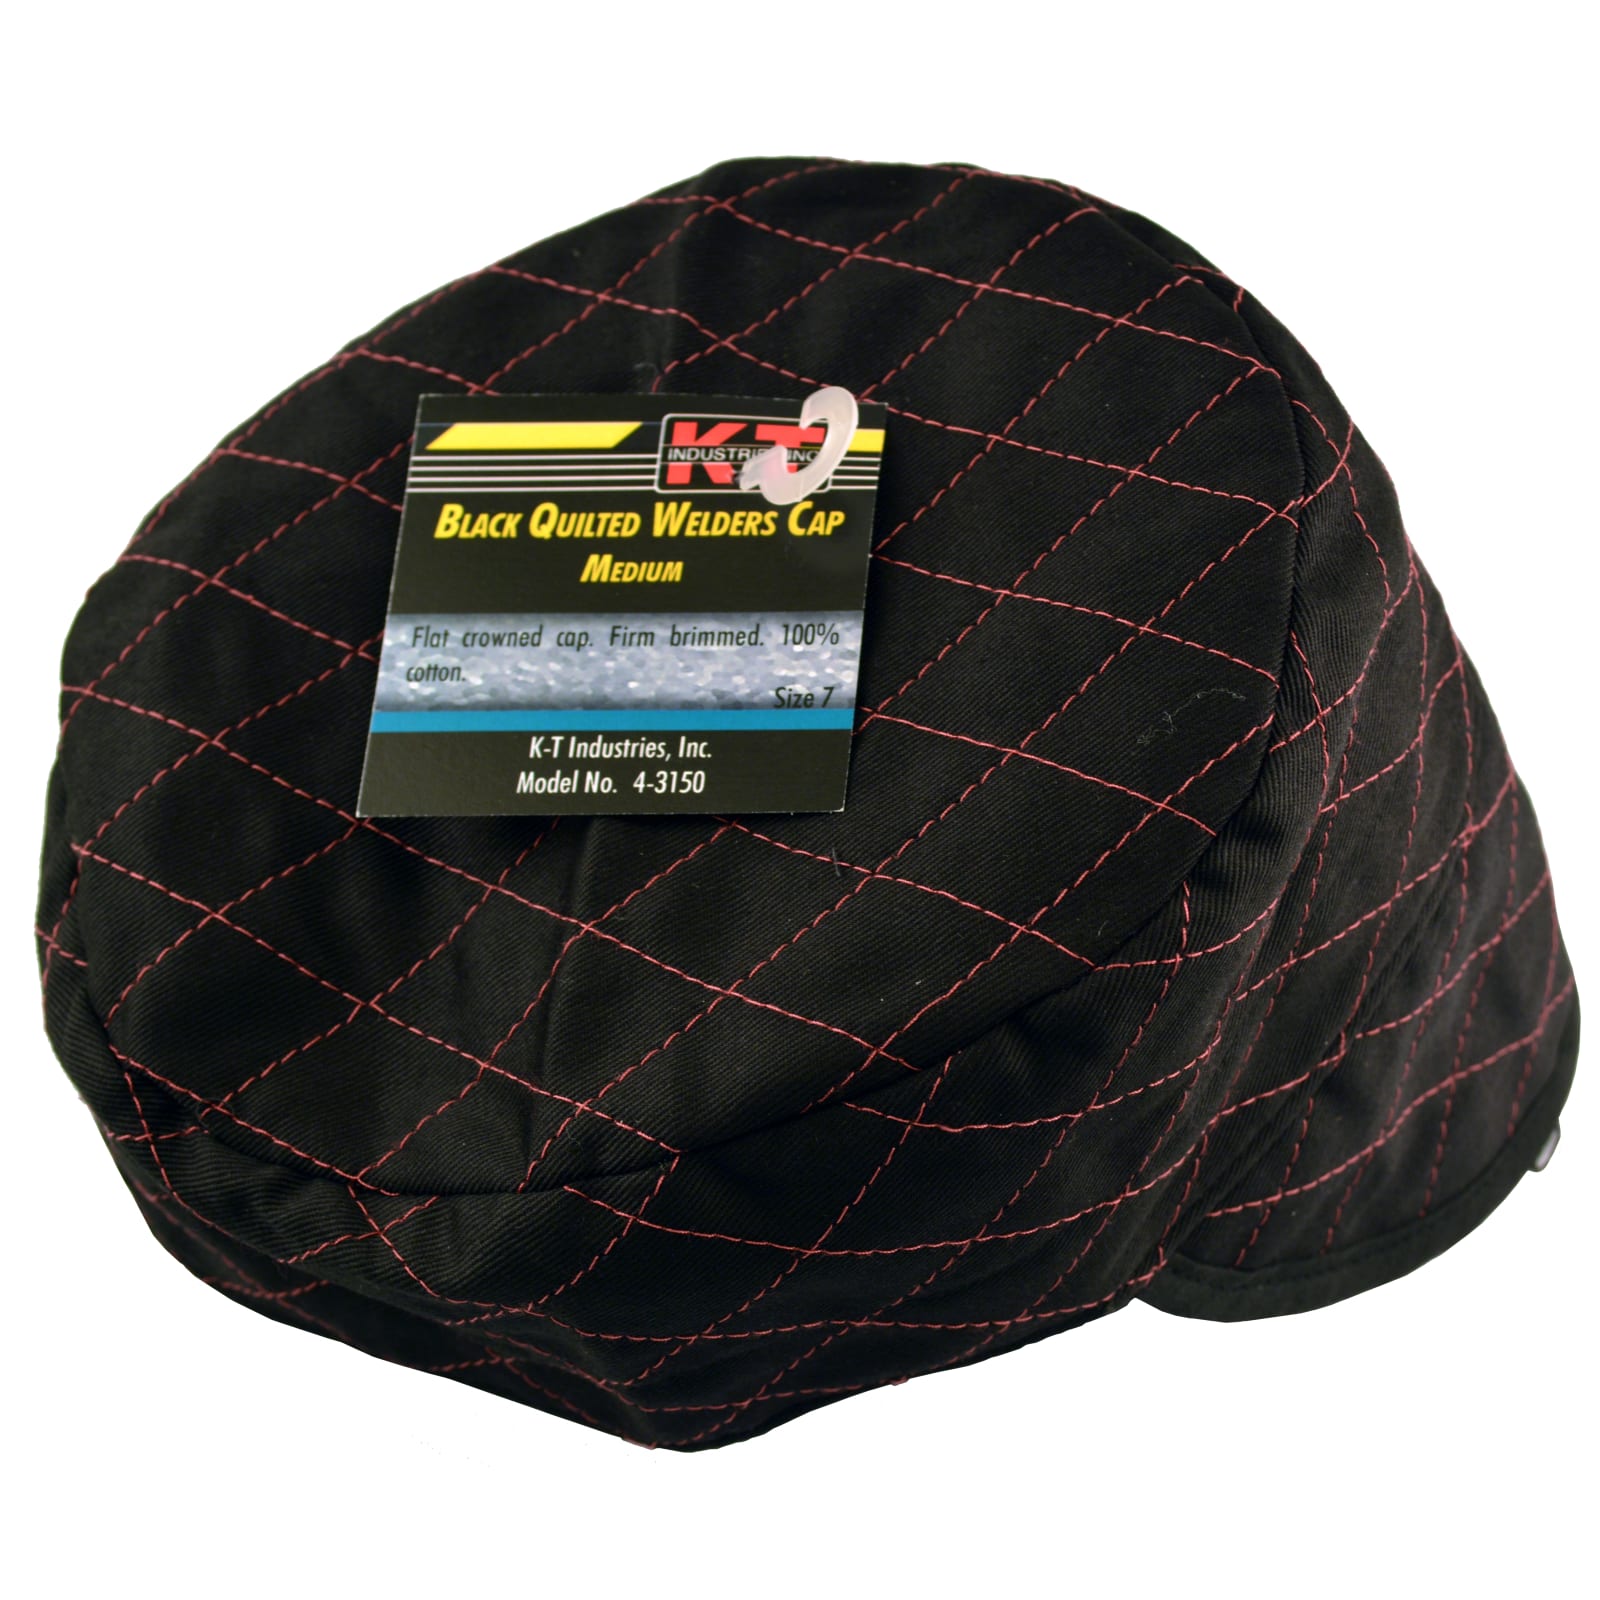 Medium Black Quilted Welder's Cap by KT Industries Inc. at